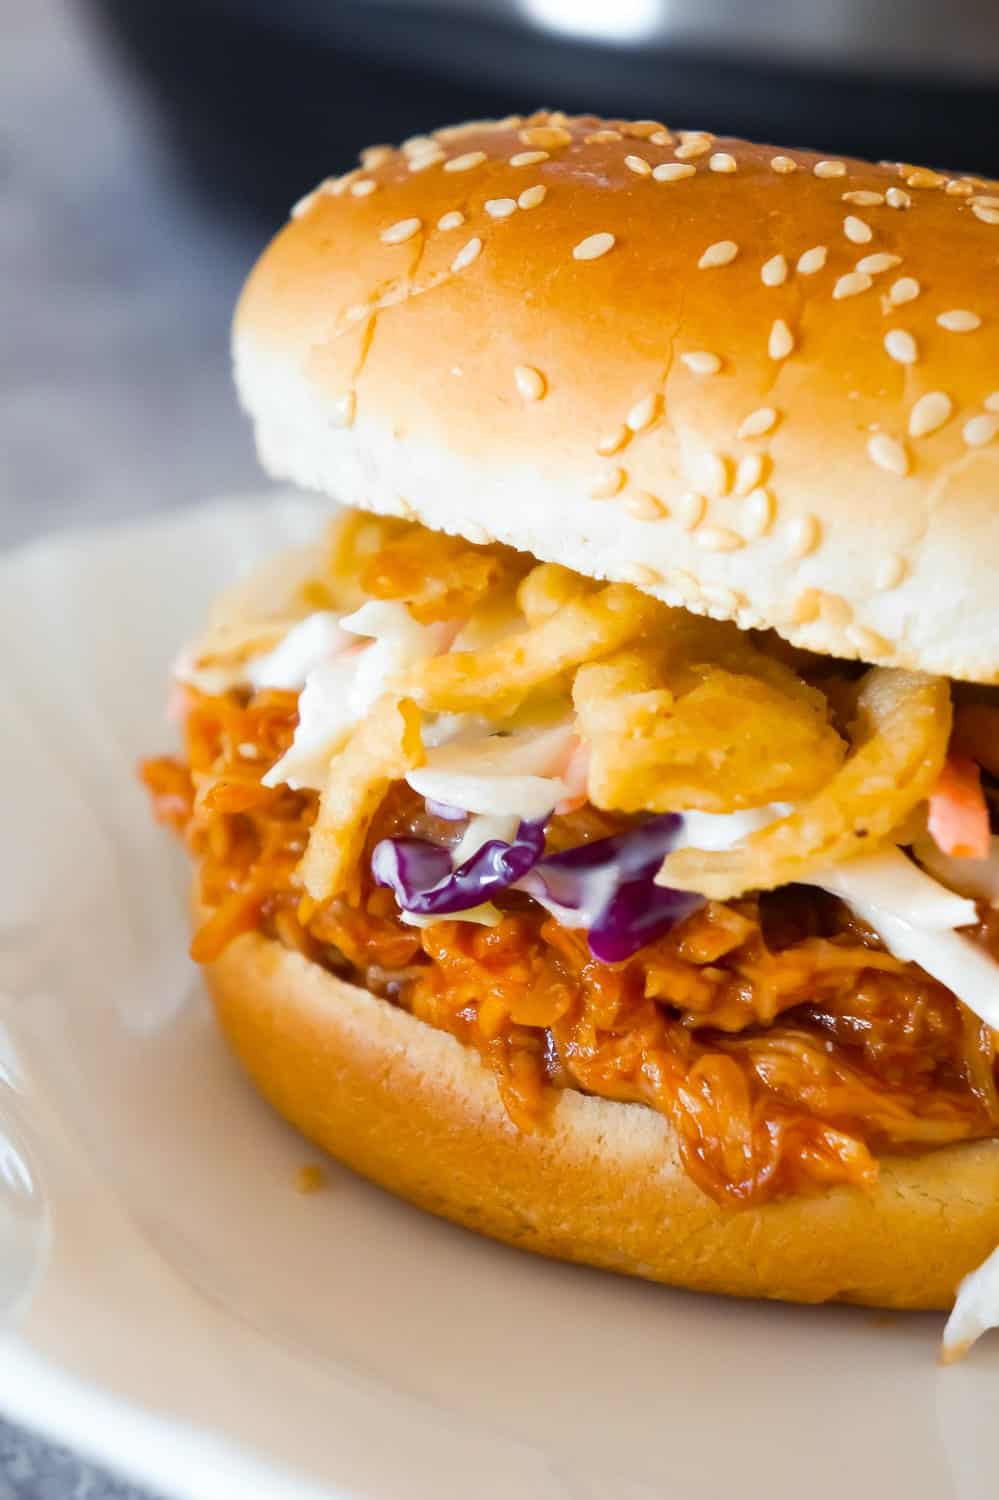 Instant Pot Honey BBQ Chicken Sandwiches are an easy and delicious dinner perfect for weeknights. These shredded chicken sandwiches with honey BBQ sauce are topped with coleslaw and French's fried onions.